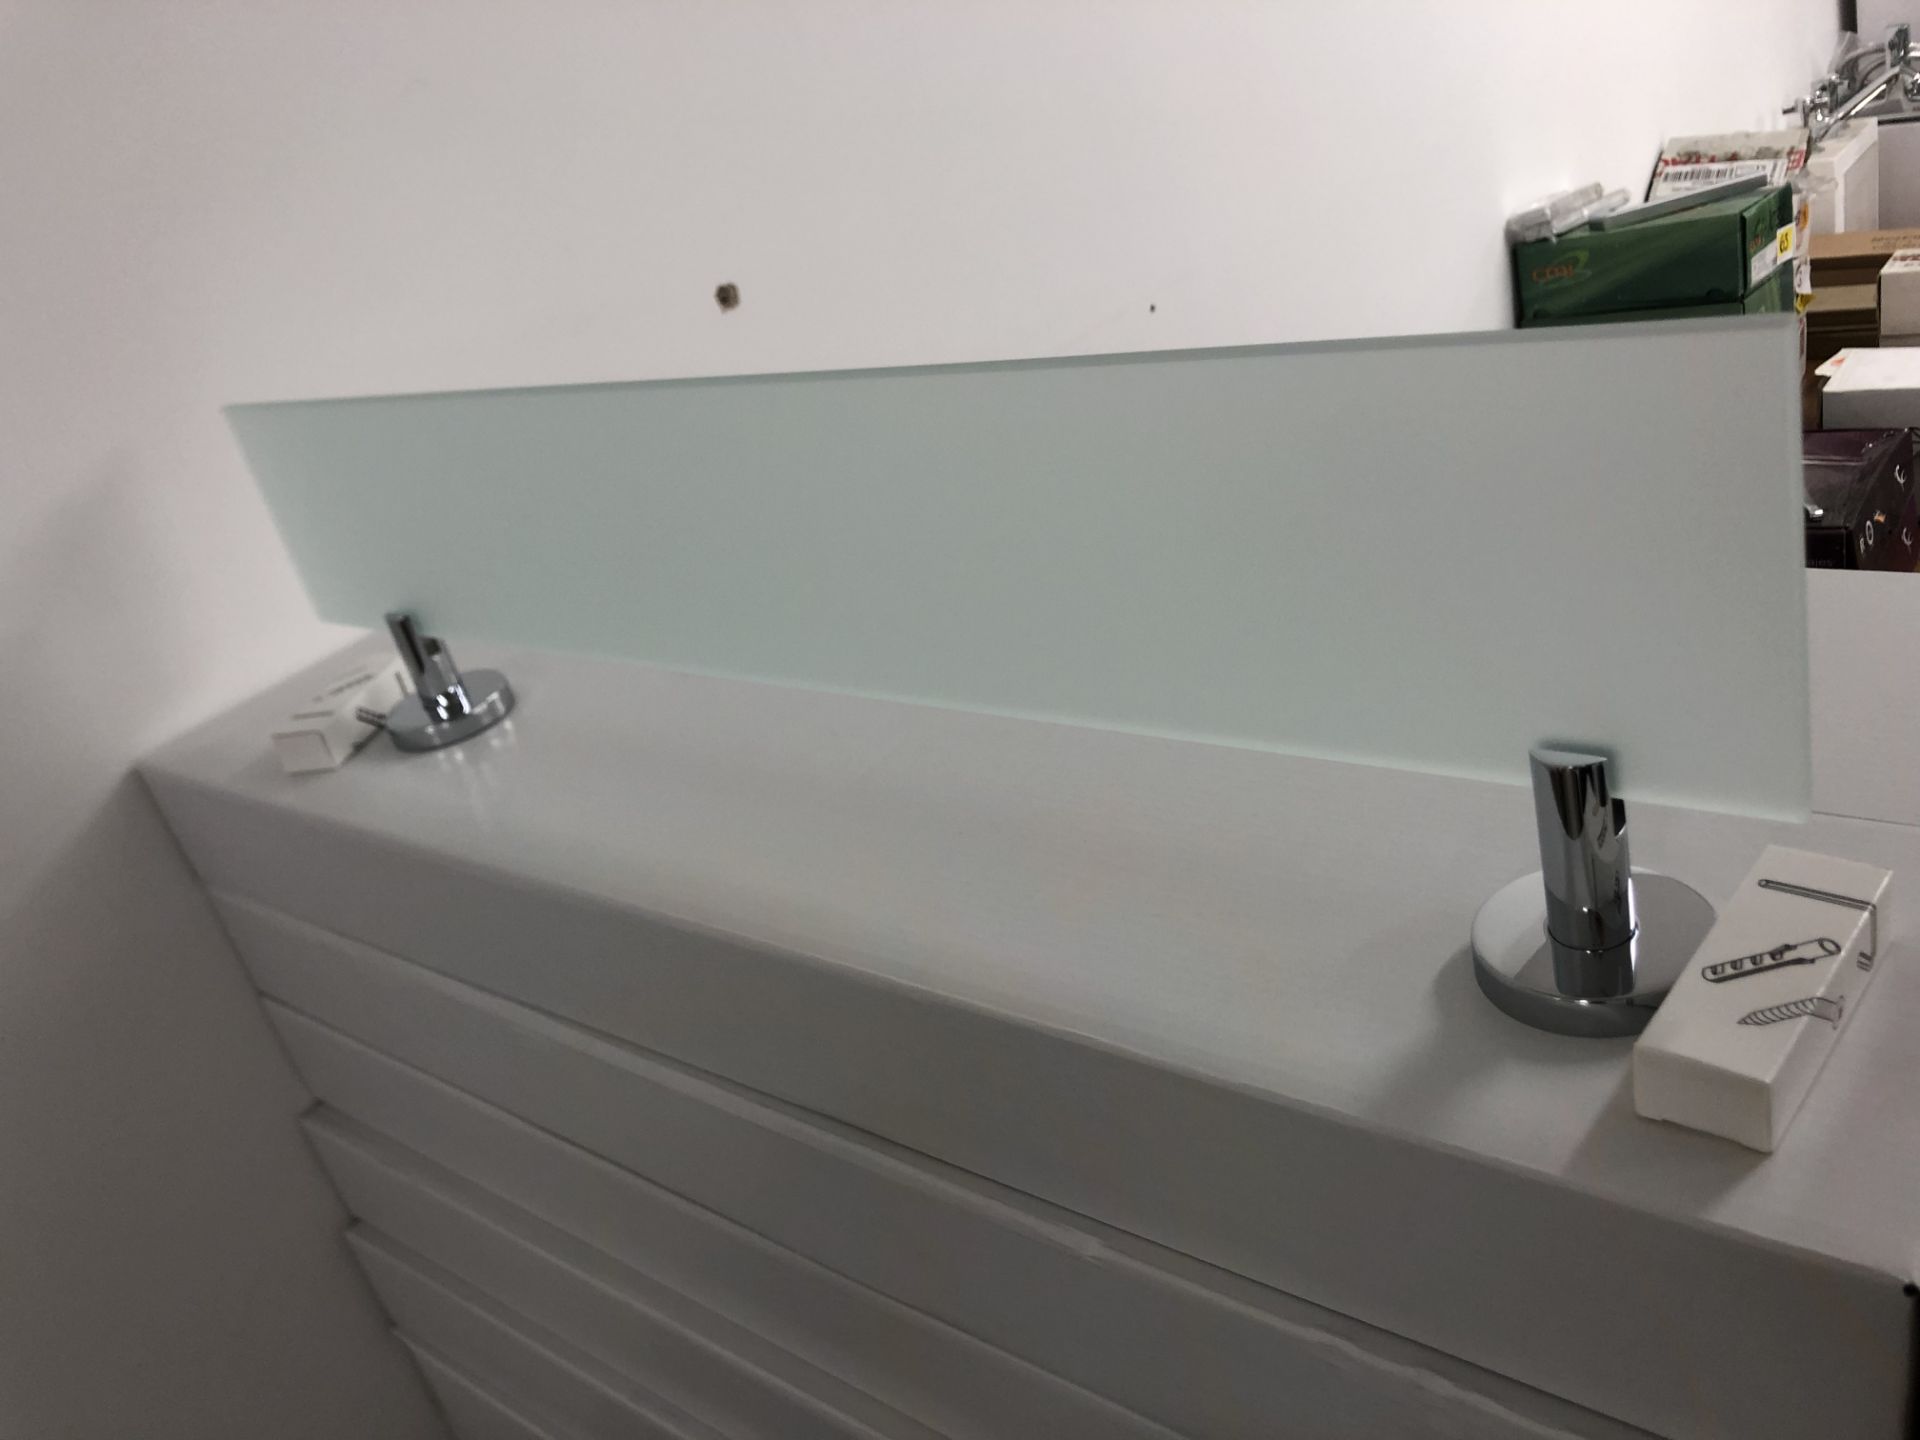 BNIB DESIGNER CHROME AND FROSTED GLASS BATHROOM 600MM SHELF AND FITTINGS £59 - Image 2 of 3